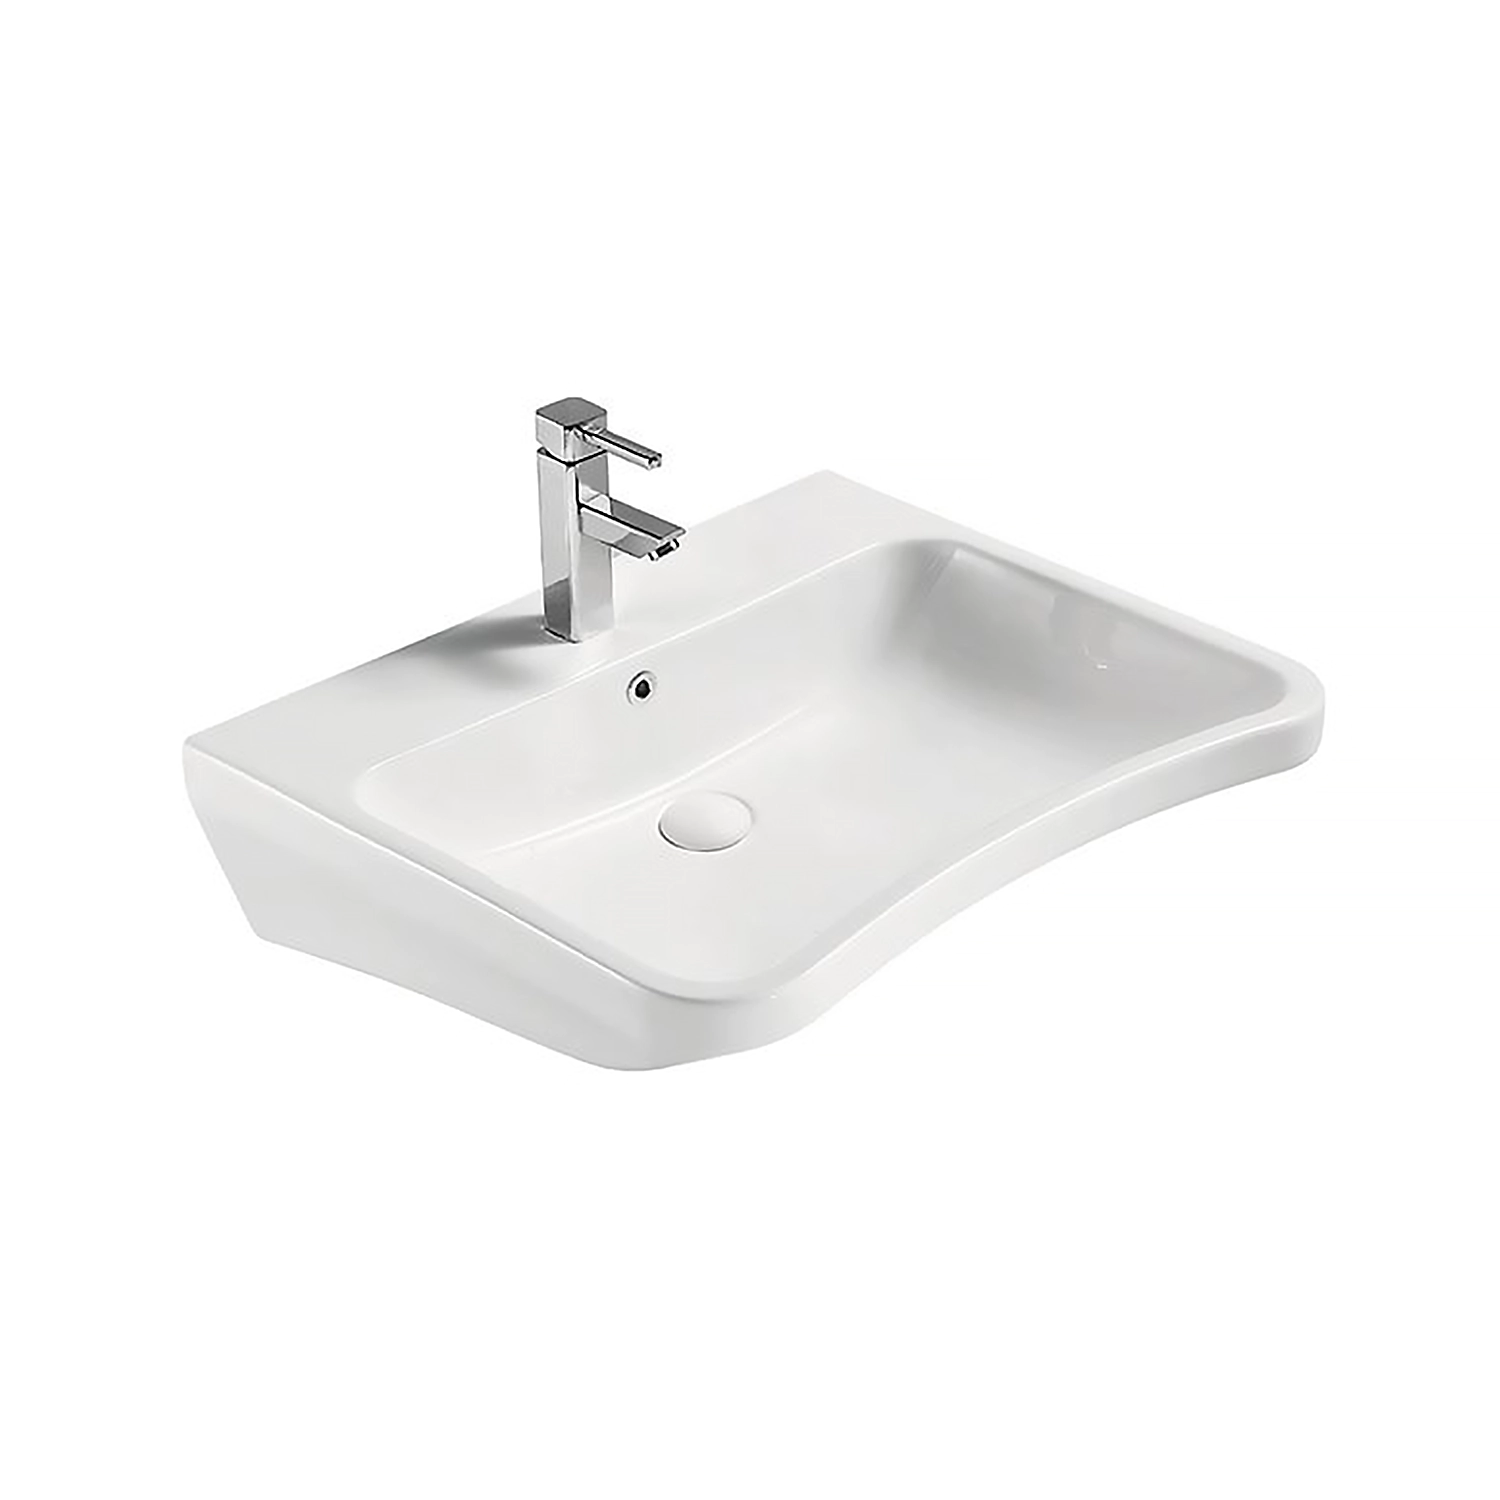 25 inch handicapped wash basin in glossy white color, wall-hung wheelchair accessible ada bathroom sink